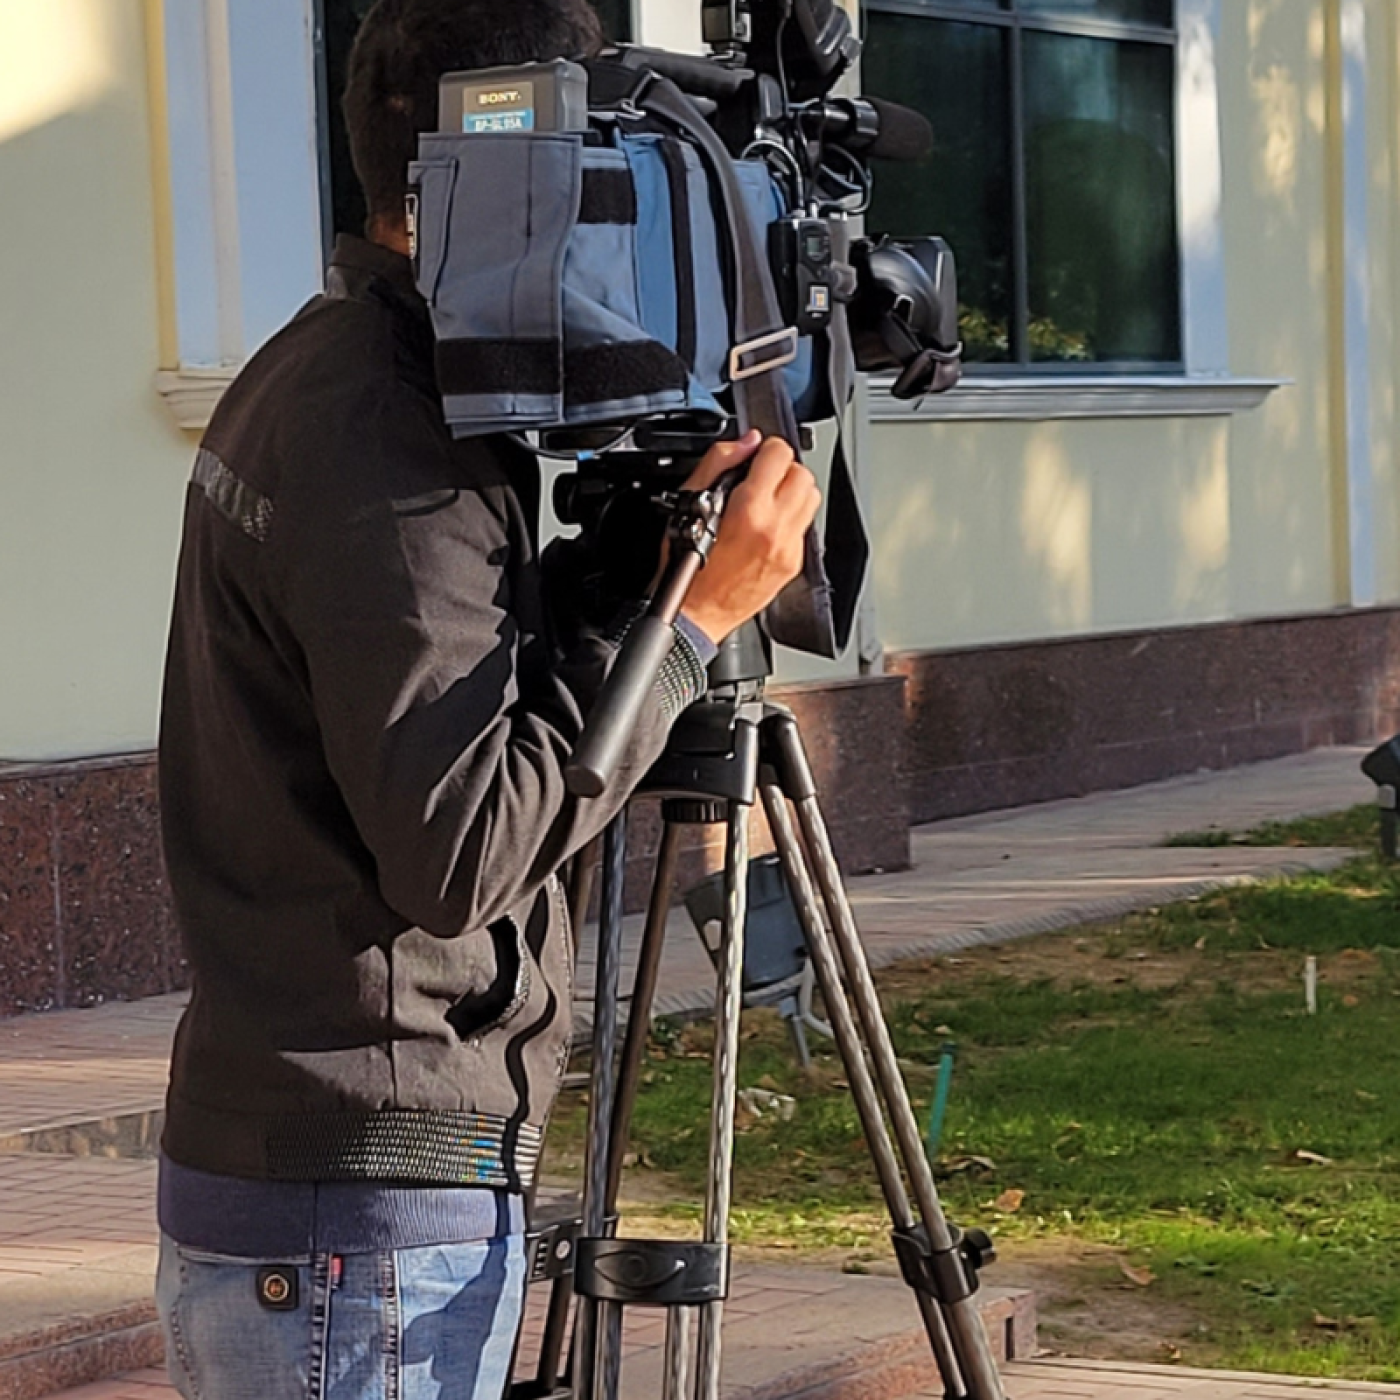 person operating camera  with reporter in Uzbekistan.